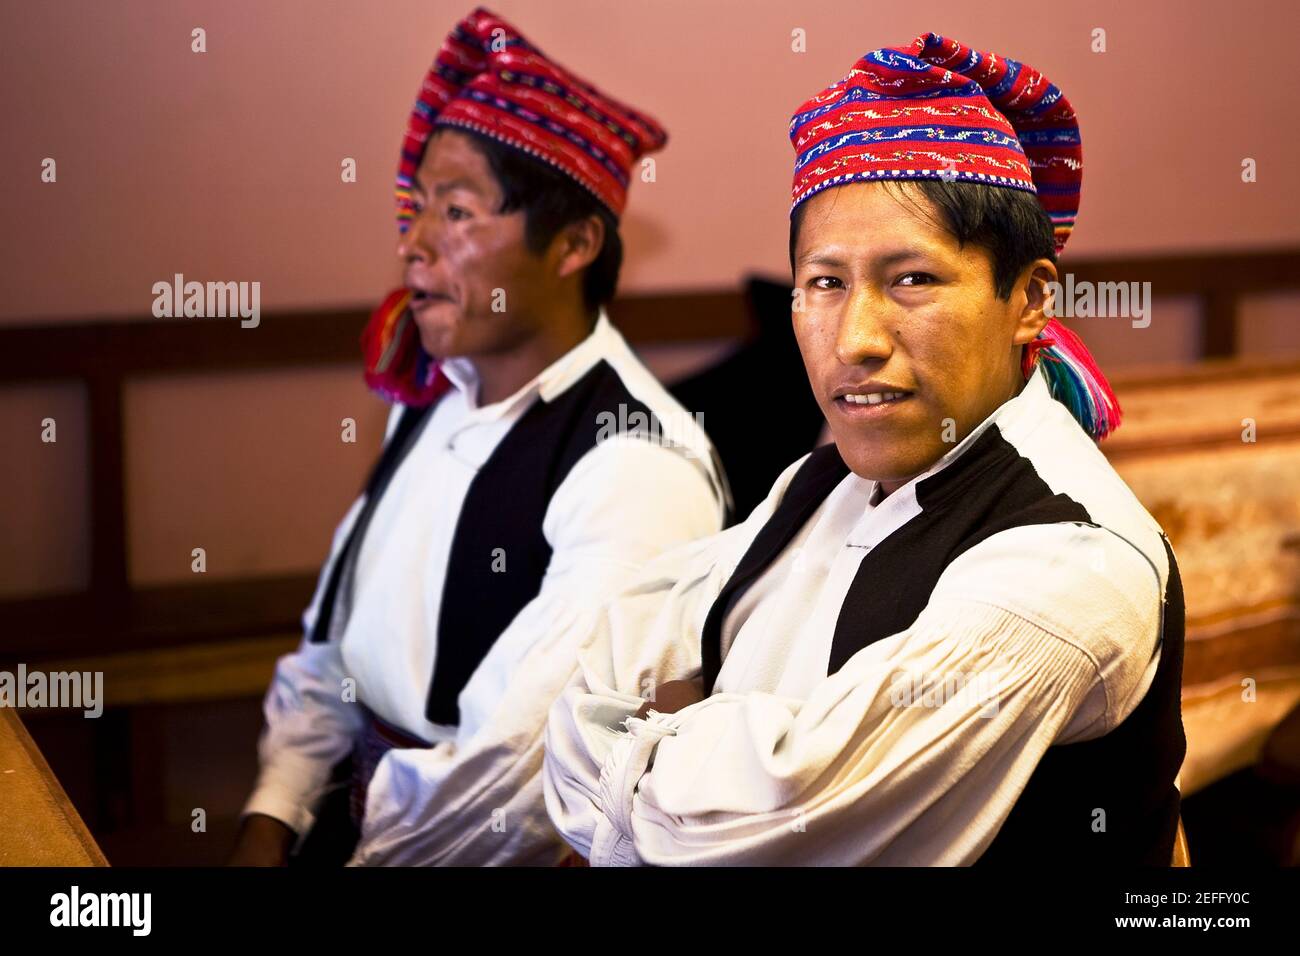 Close-up of two young men taking part in a wedding ceremony, Taquile Island, Lake Titicaca, Puno, Peru Stock Photo